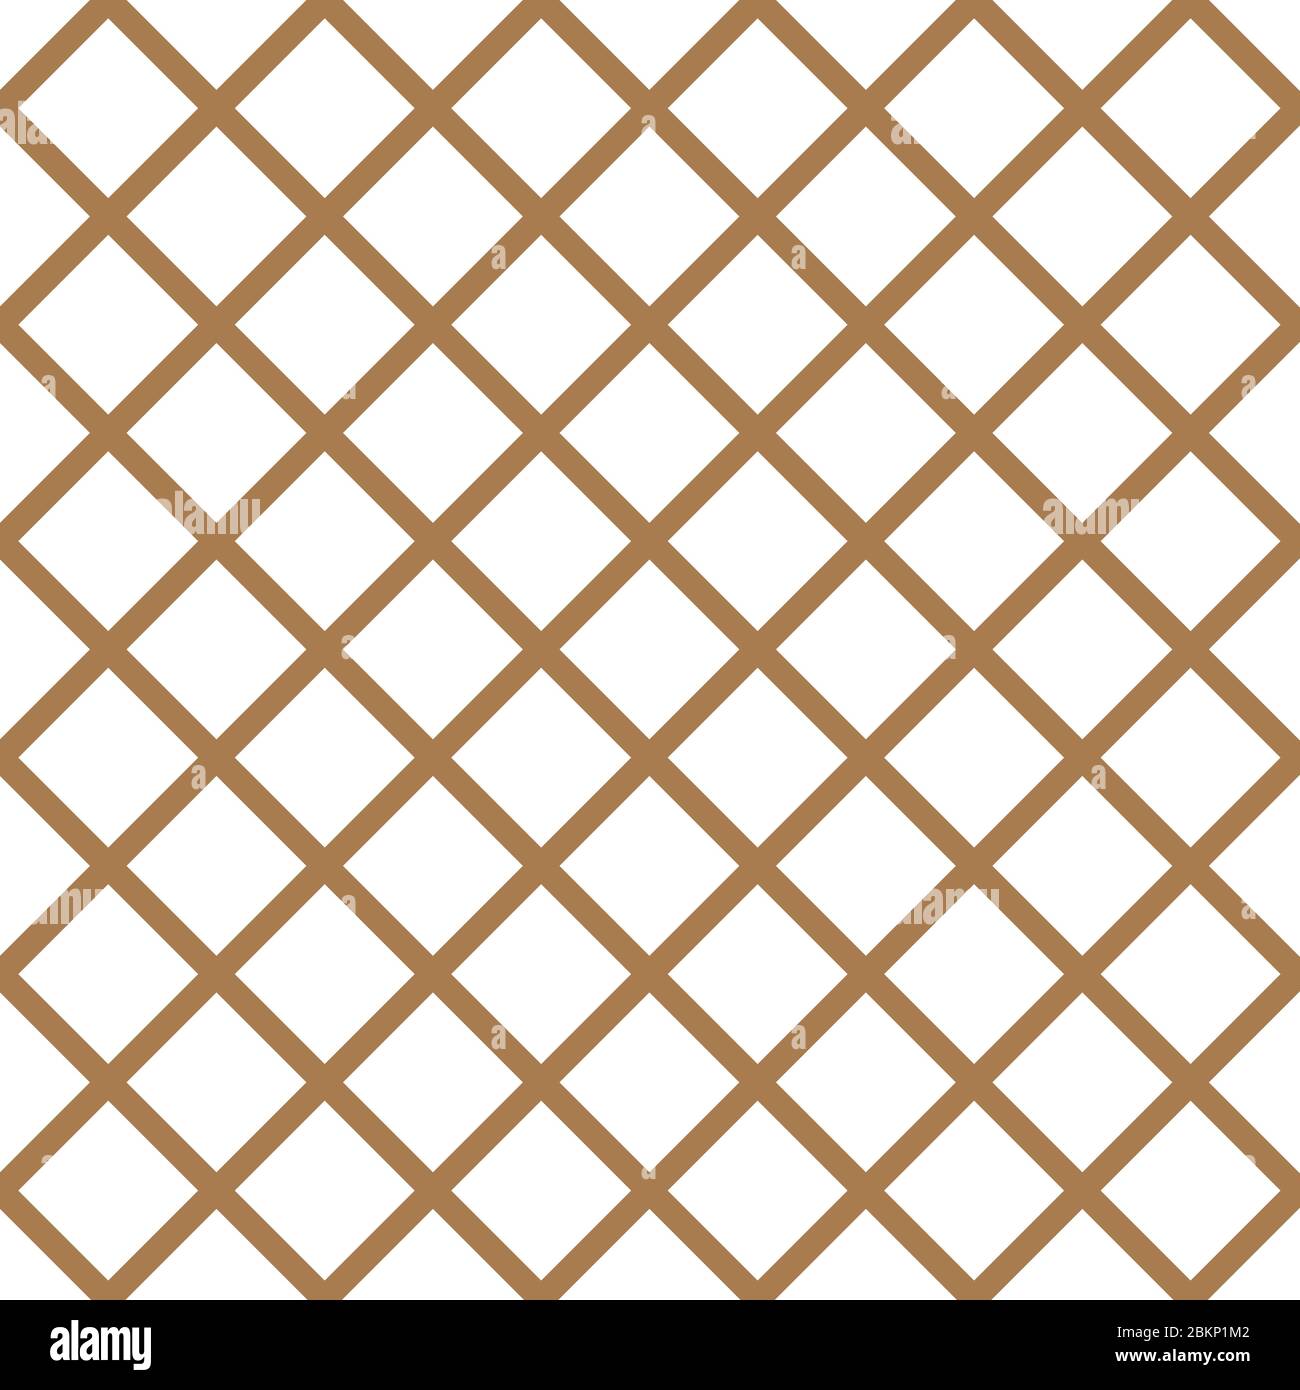 https://c8.alamy.com/comp/2BKP1M2/net-grid-seamless-texture-cage-or-wire-mesh-2BKP1M2.jpg